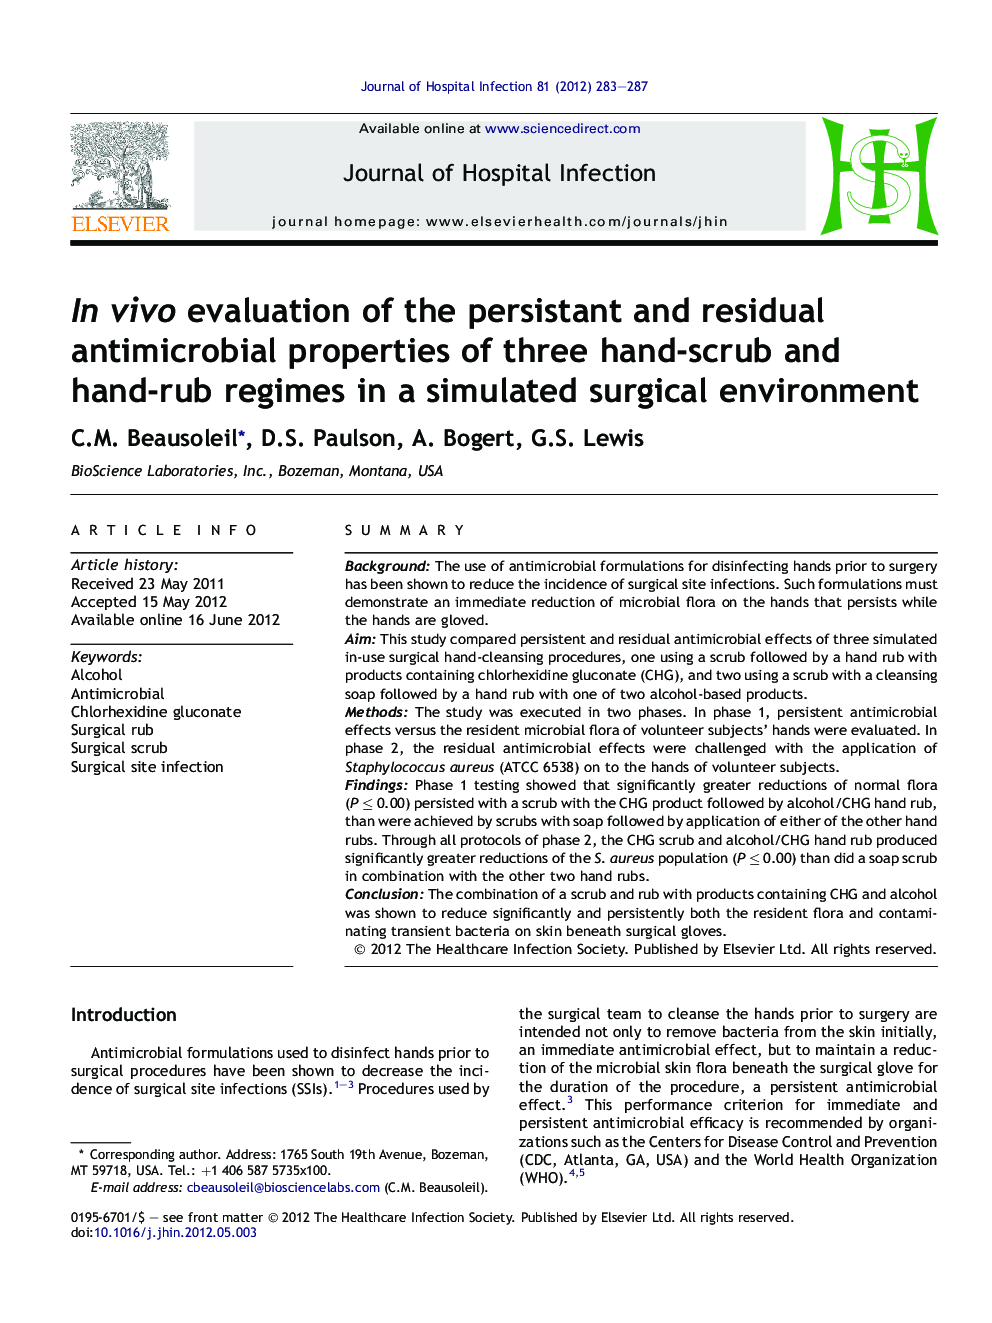 In vivo evaluation of the persistant and residual antimicrobial properties of three hand-scrub and hand-rub regimes in a simulated surgical environment